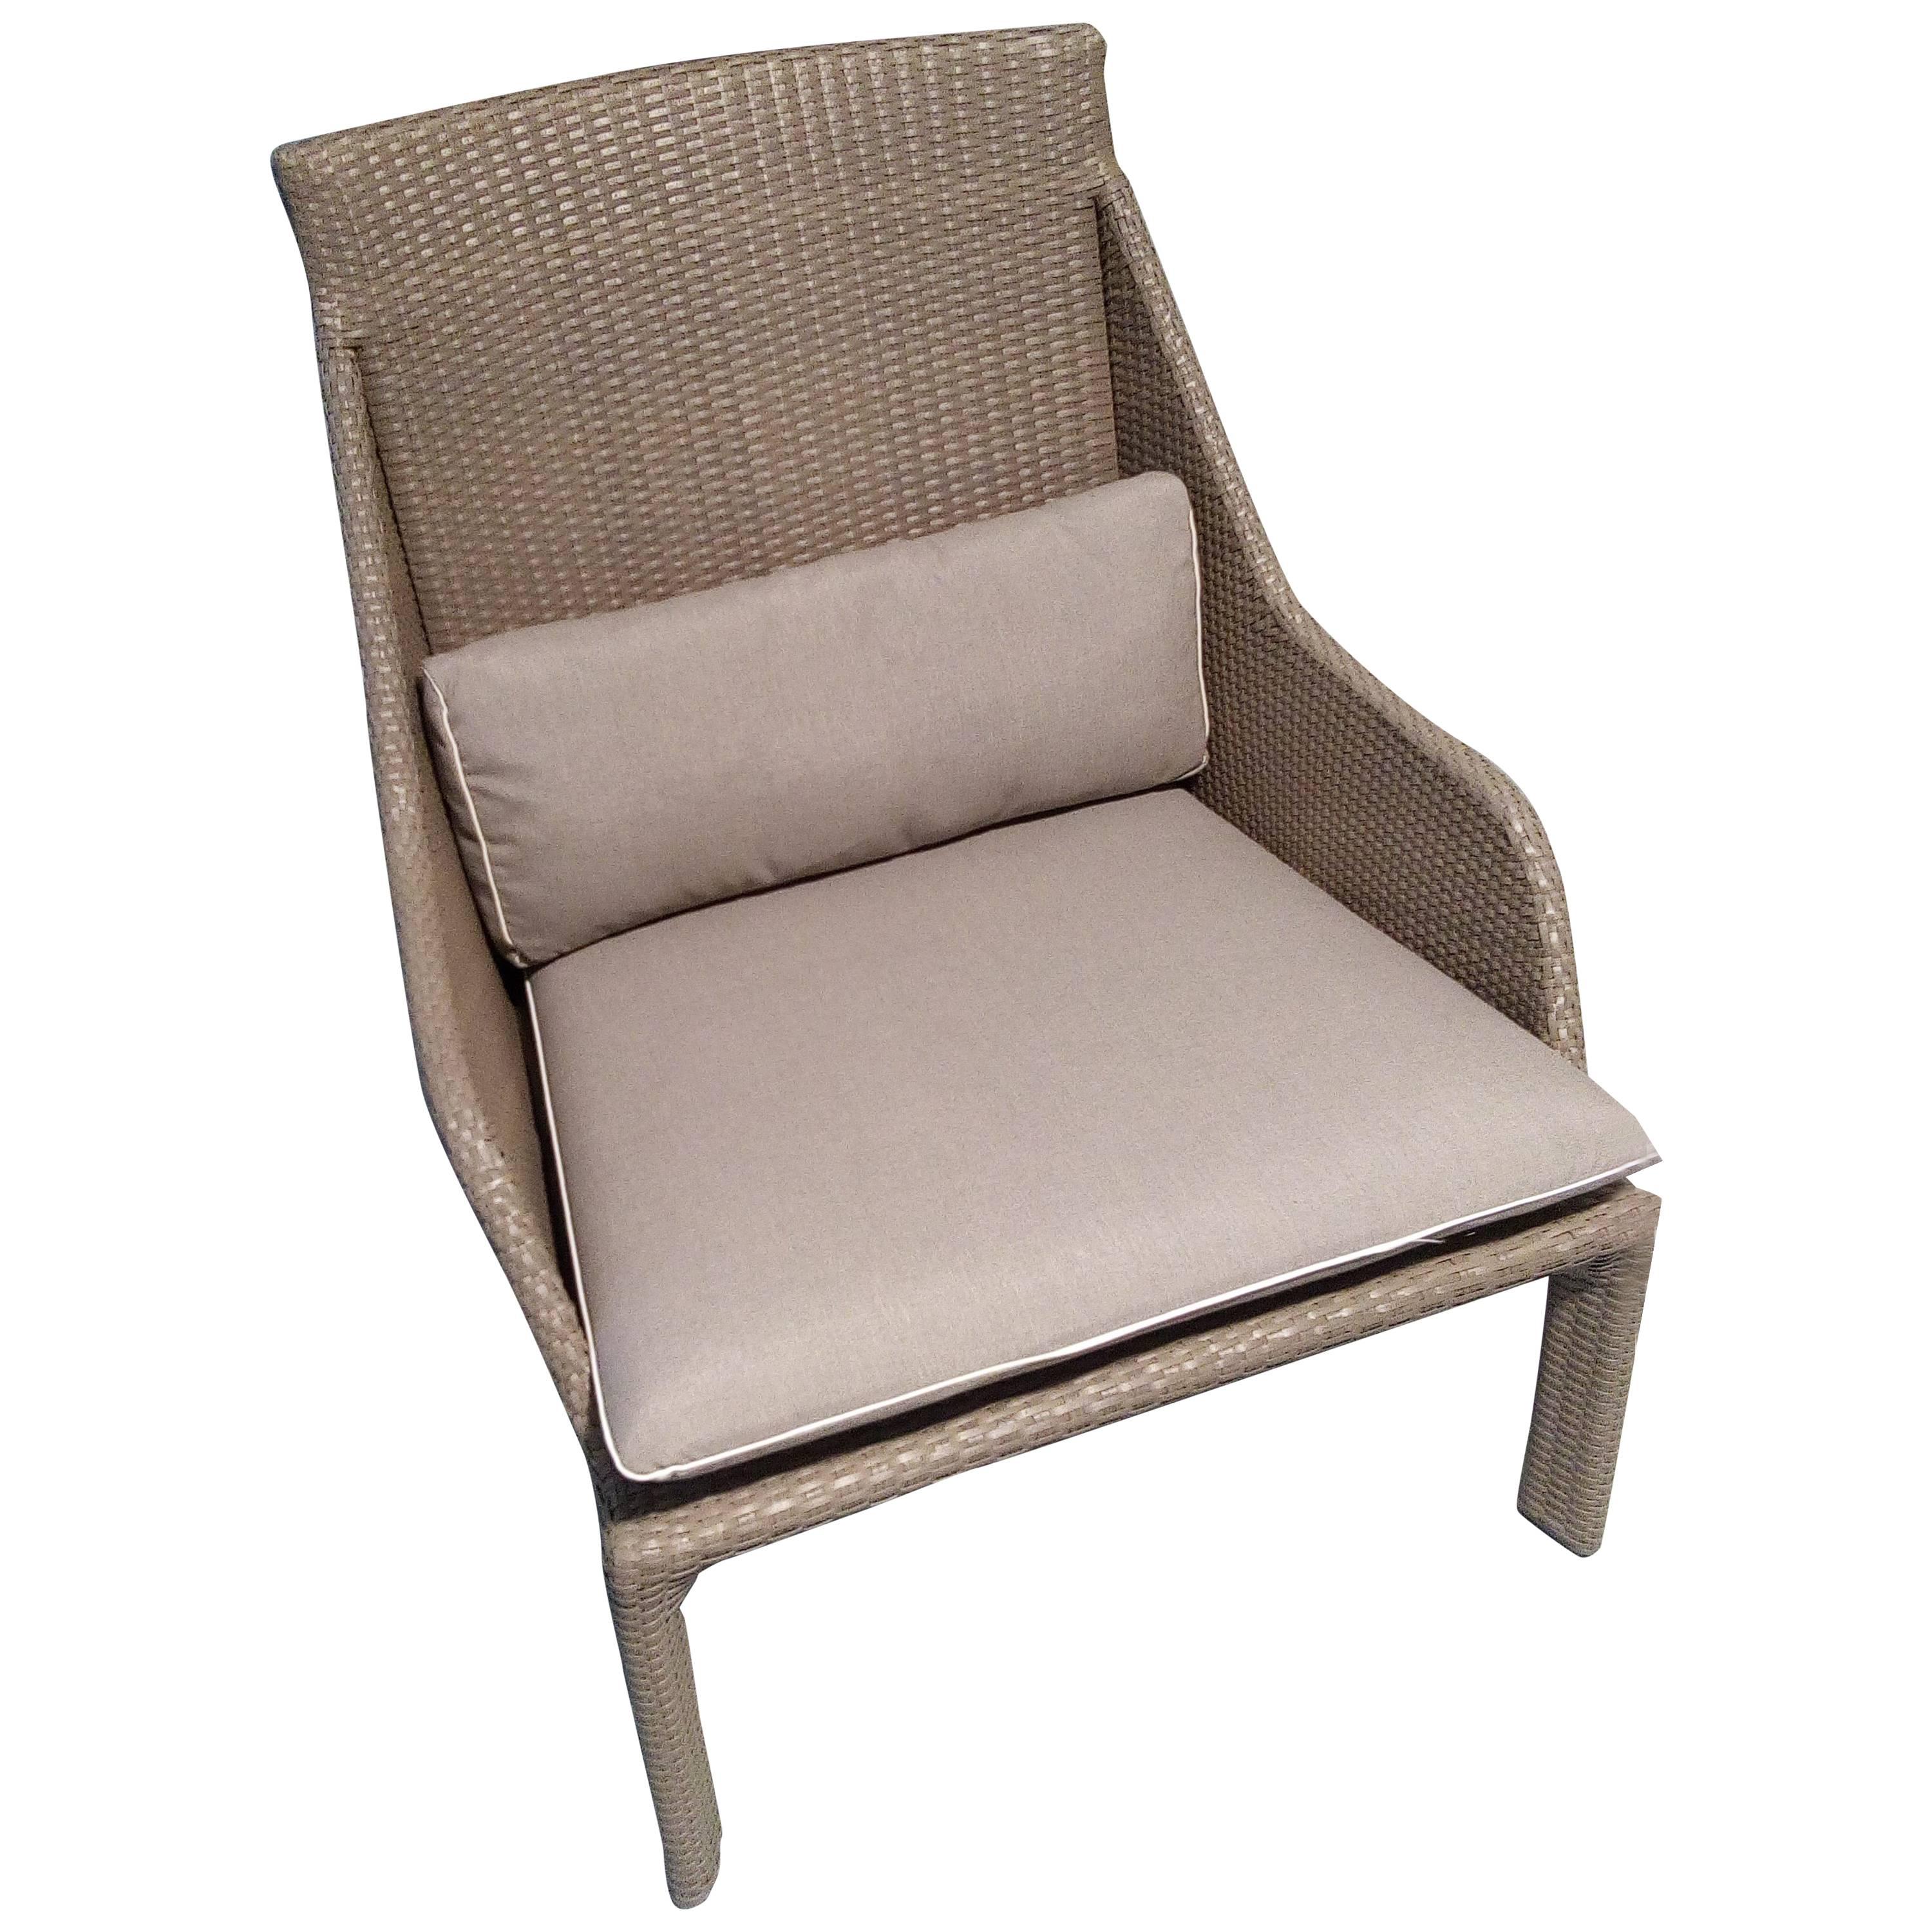 Outdoor Lounge Armchair Bel Air Collection Design by Sacha Lakic